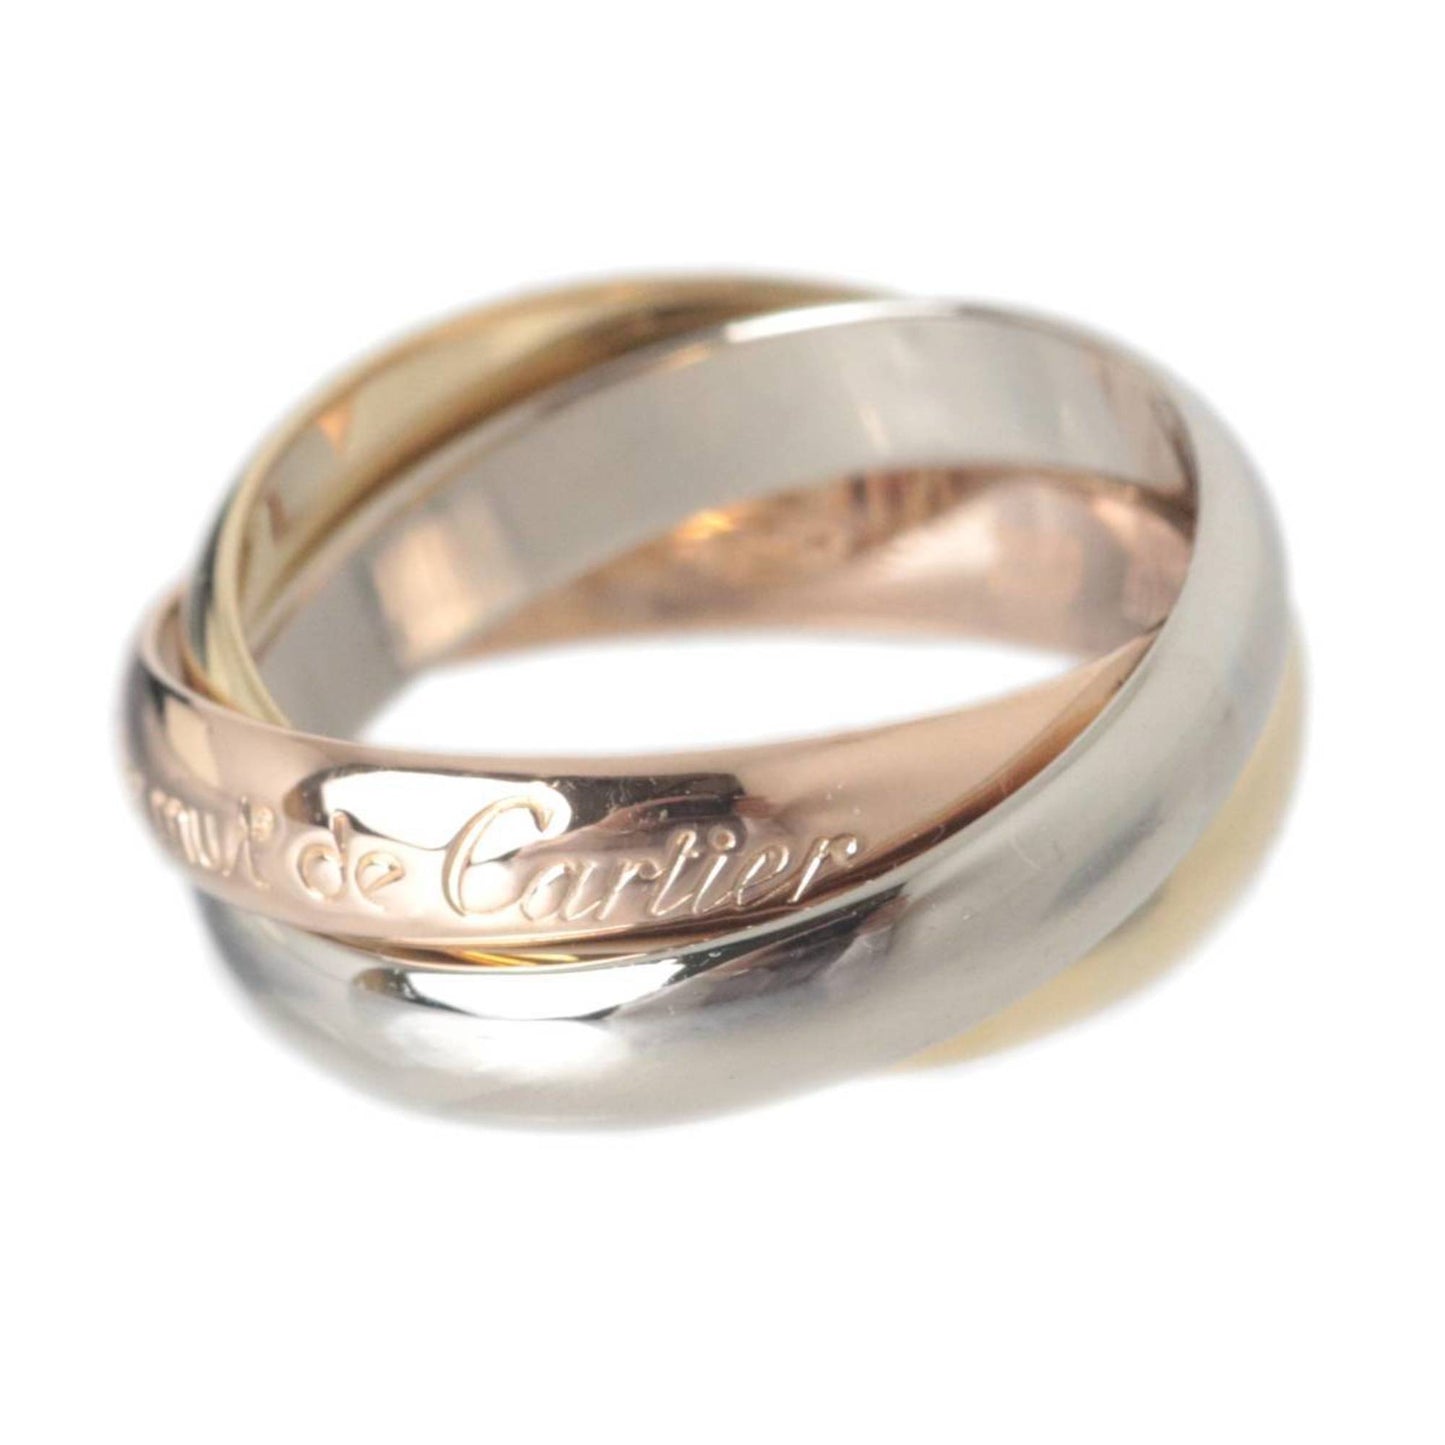 Cartier Women's Trinity Gold Ring by Cartier in Multicolour